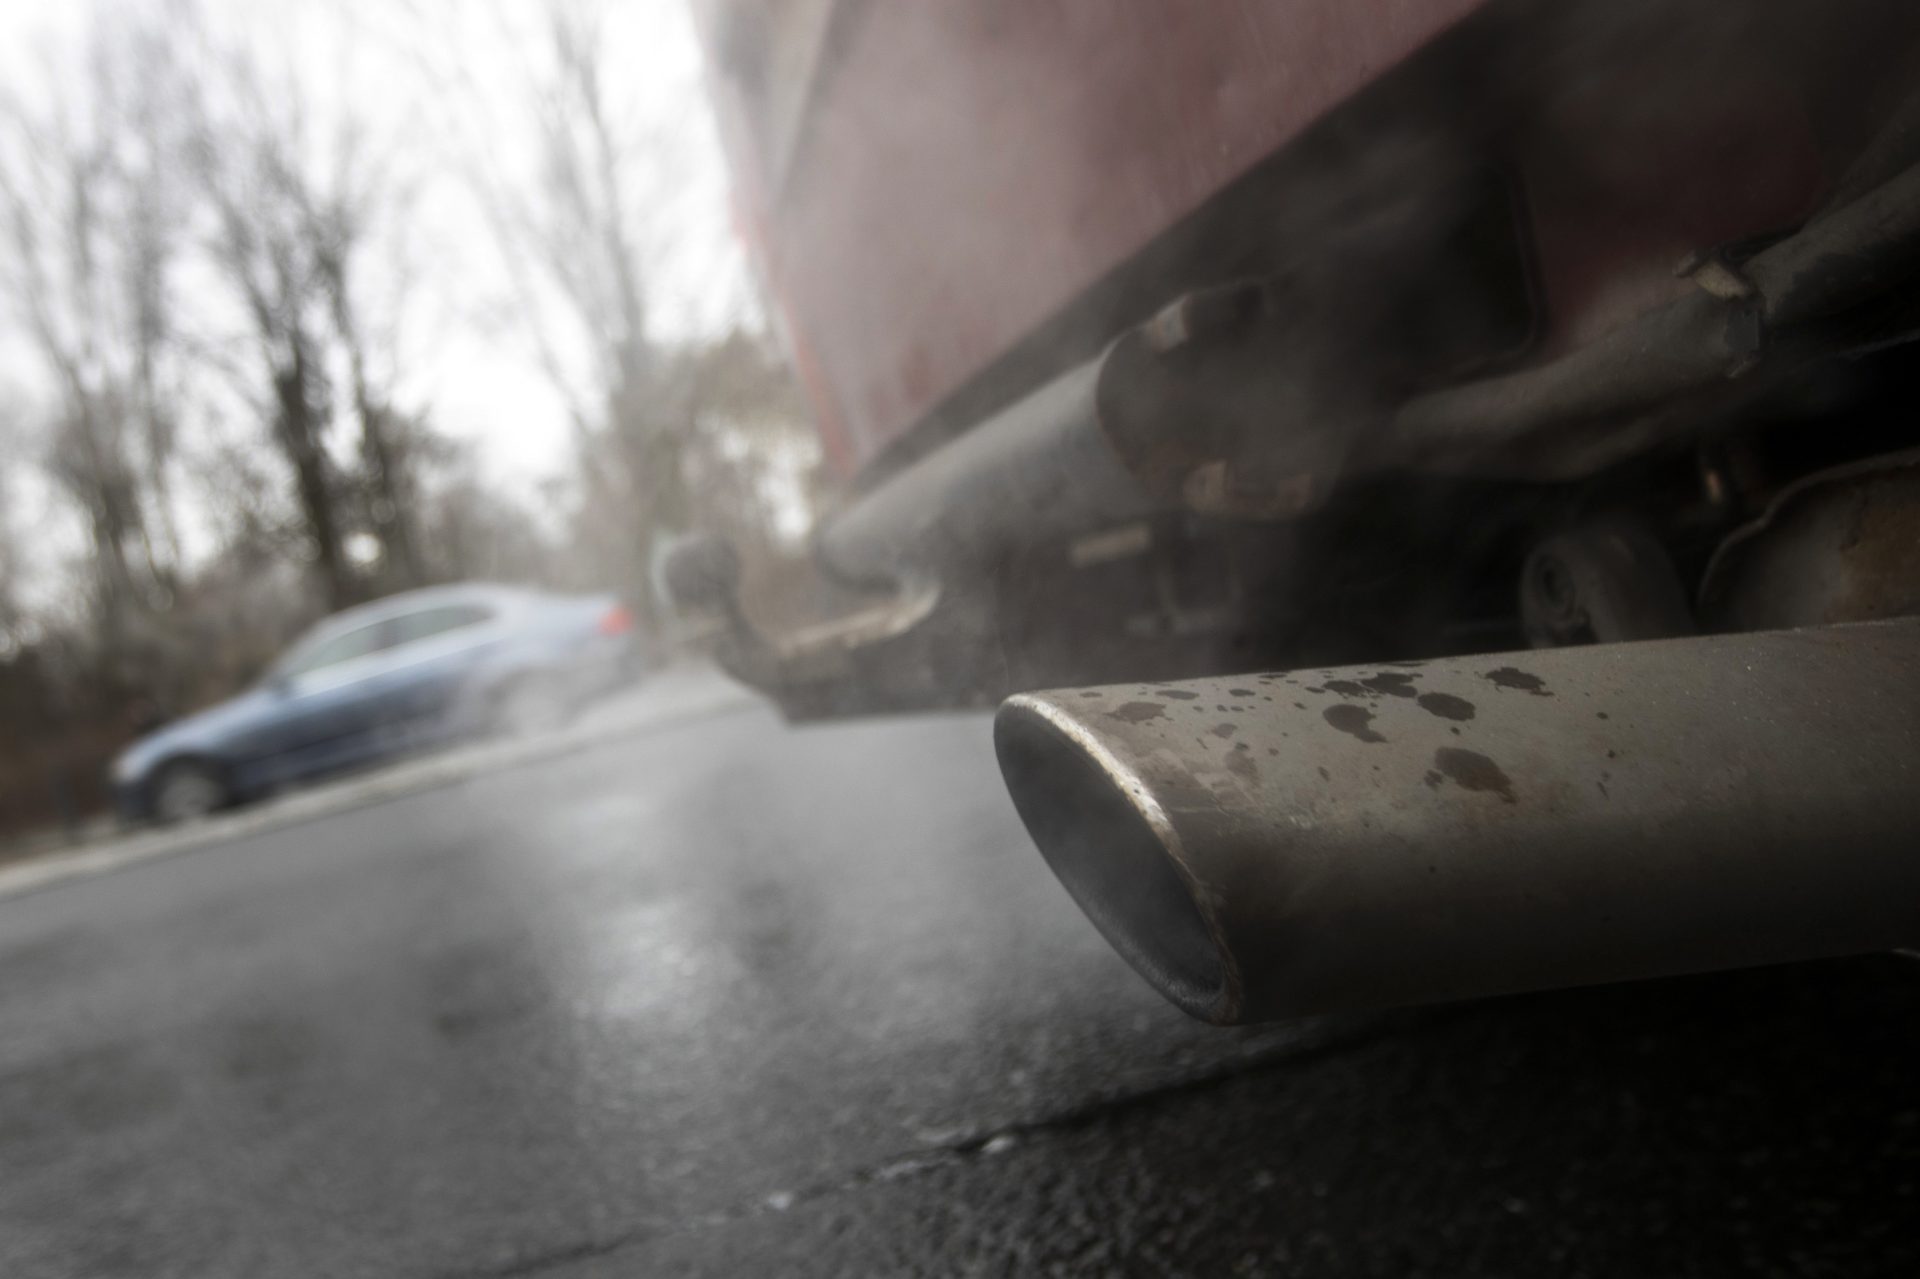 Berlin (Germany), 10/03/2019.- Detail of an exhaust pipe of a Volkswagen van taking part in a car parade with dozens of VW buses against a driving ban on older diesel vehicles in the city center of Berlin, in Berlin, Germany, 10 March 2019. The city of Berlin will start a driving ban later this year, for Euro 5 and older diesel vehicles in selected parts of its city center in order to comply with stricter emission rules and tackling air pollution. (Alemania) EFE/EPA/FELIPE TRUEBA